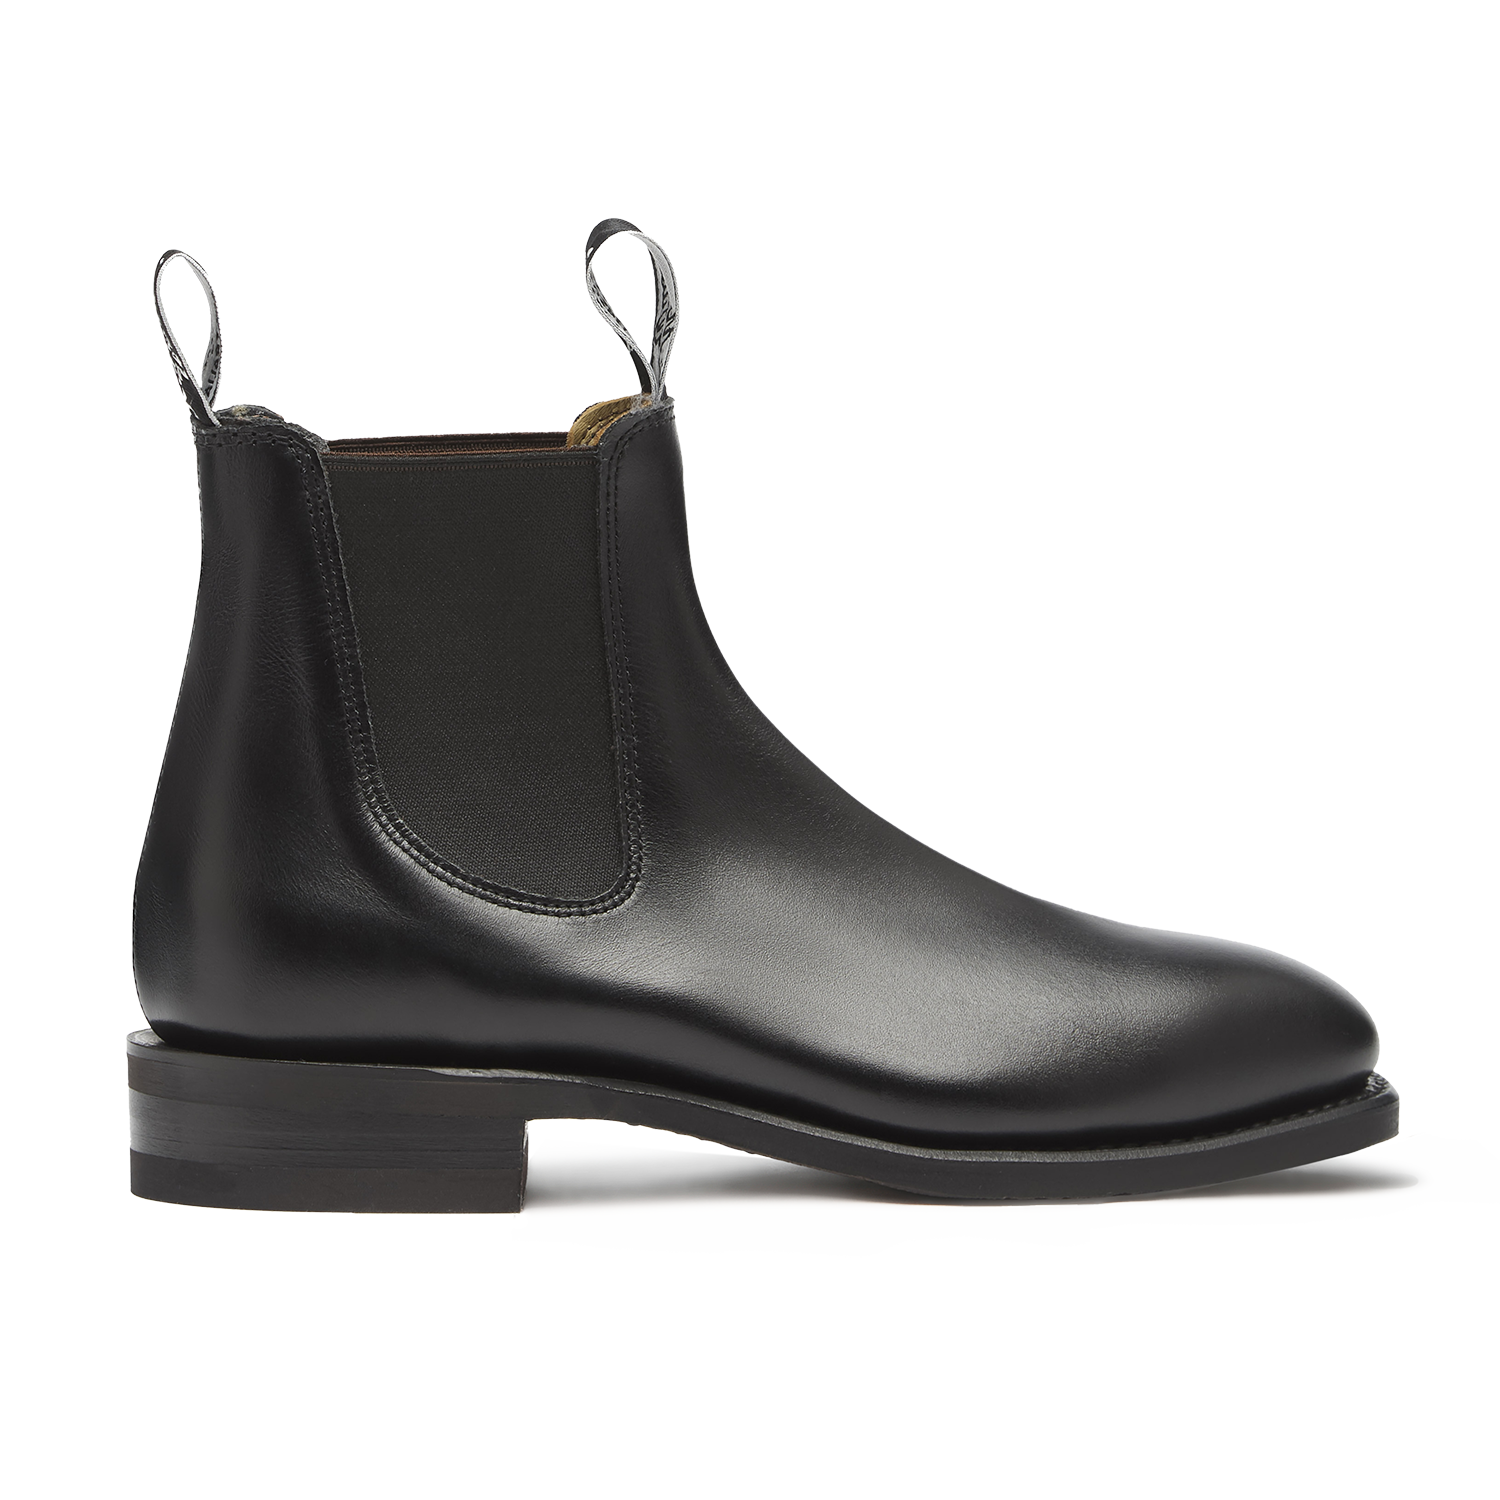 How should Chelsea boots fit? A complete comfort guide